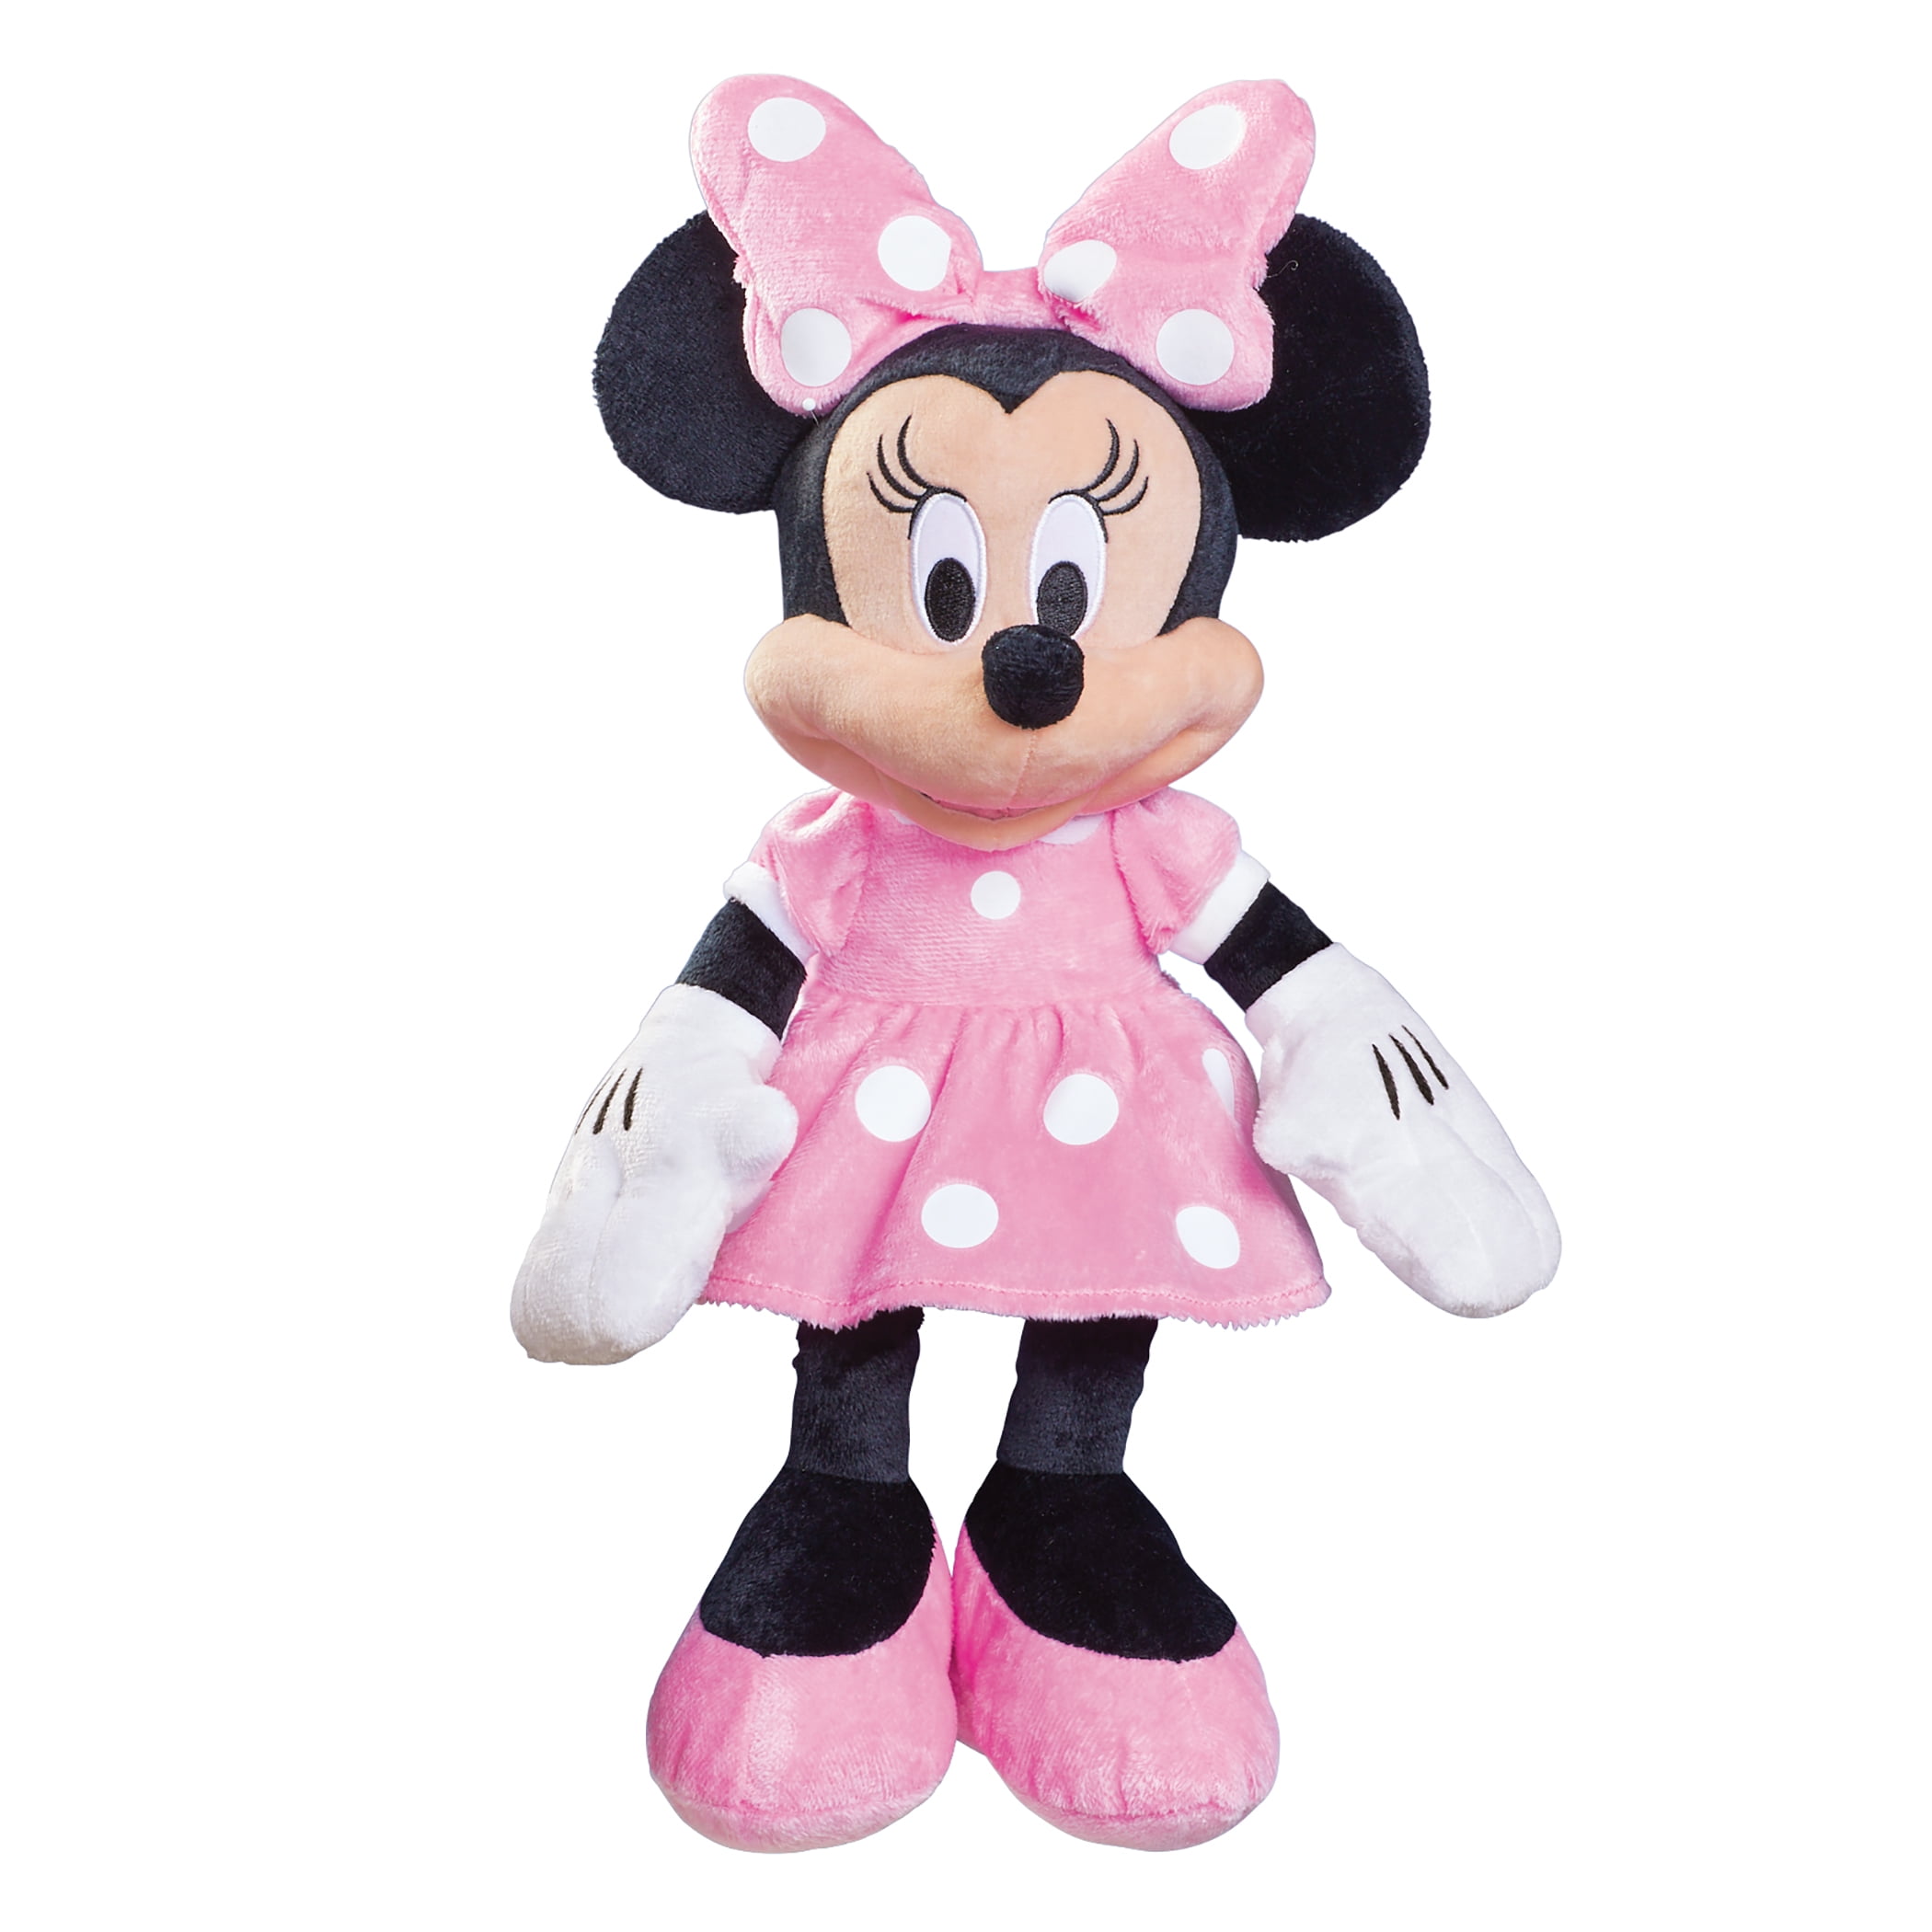 Disney Parks Mickey and Minnie Mouse Wedding Love Plush Doll Set of 2